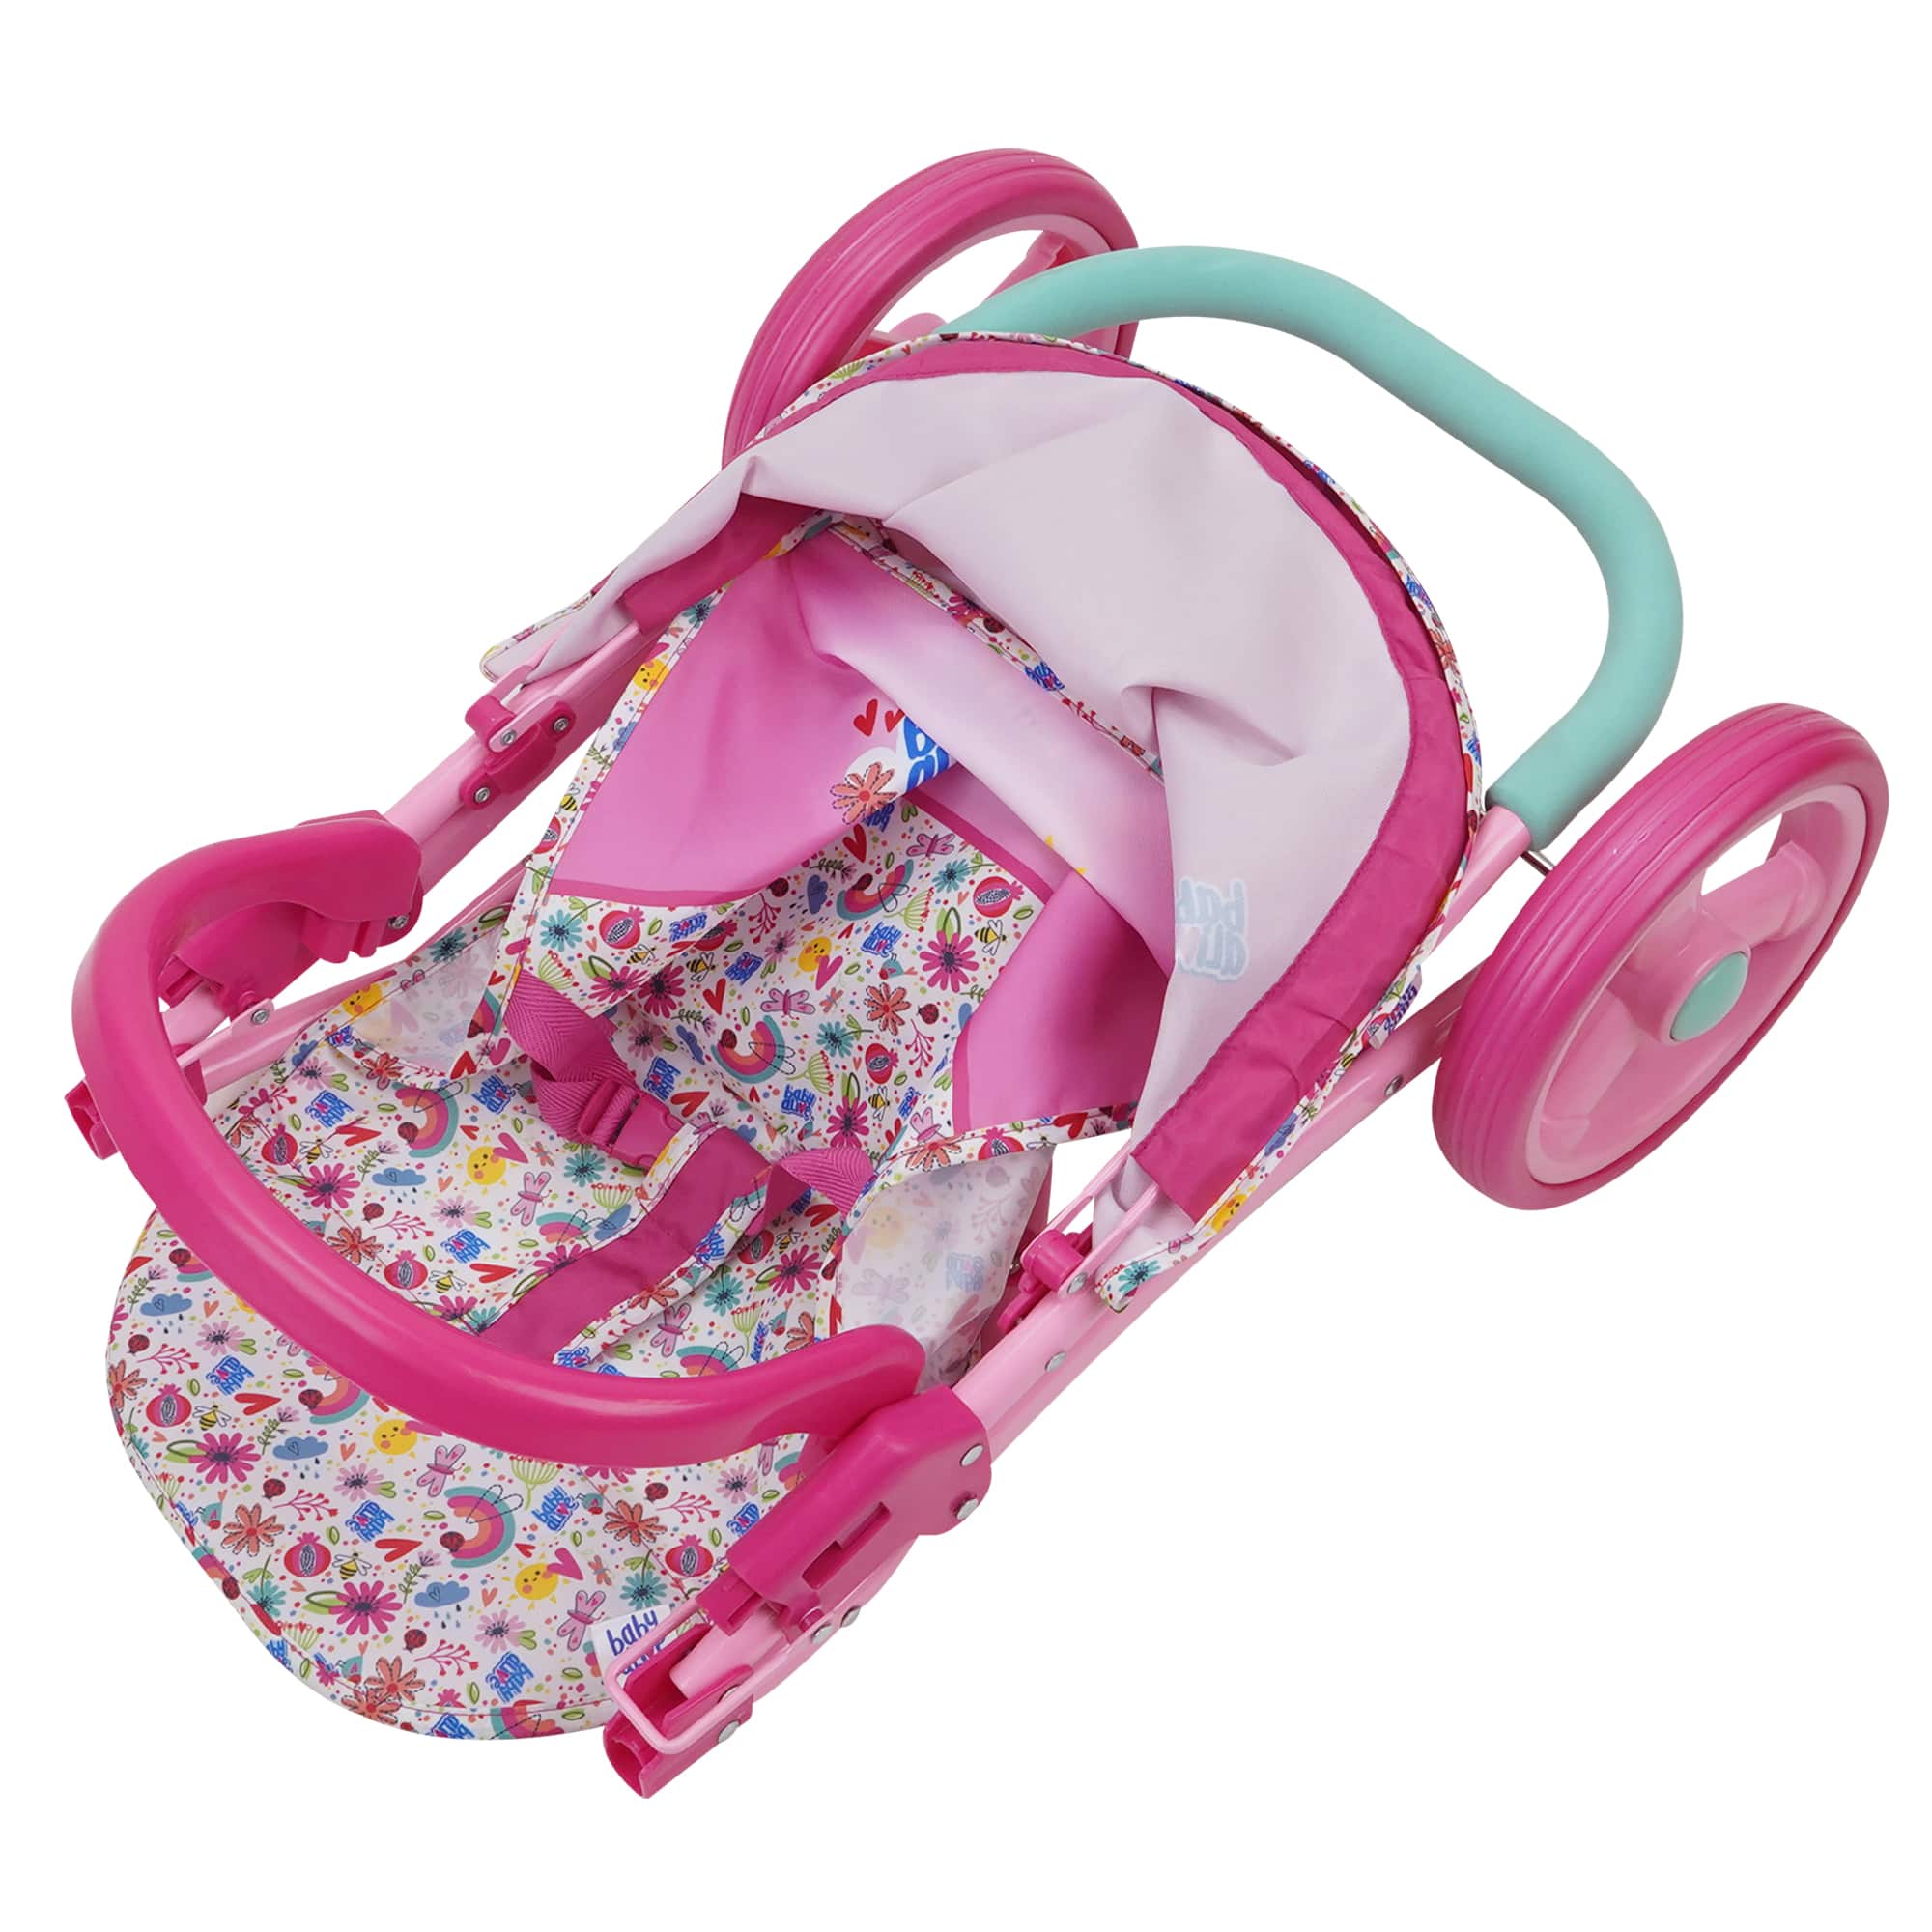 509 Crew Baby Alive Pink and Rainbow Doll Jogging Stroller